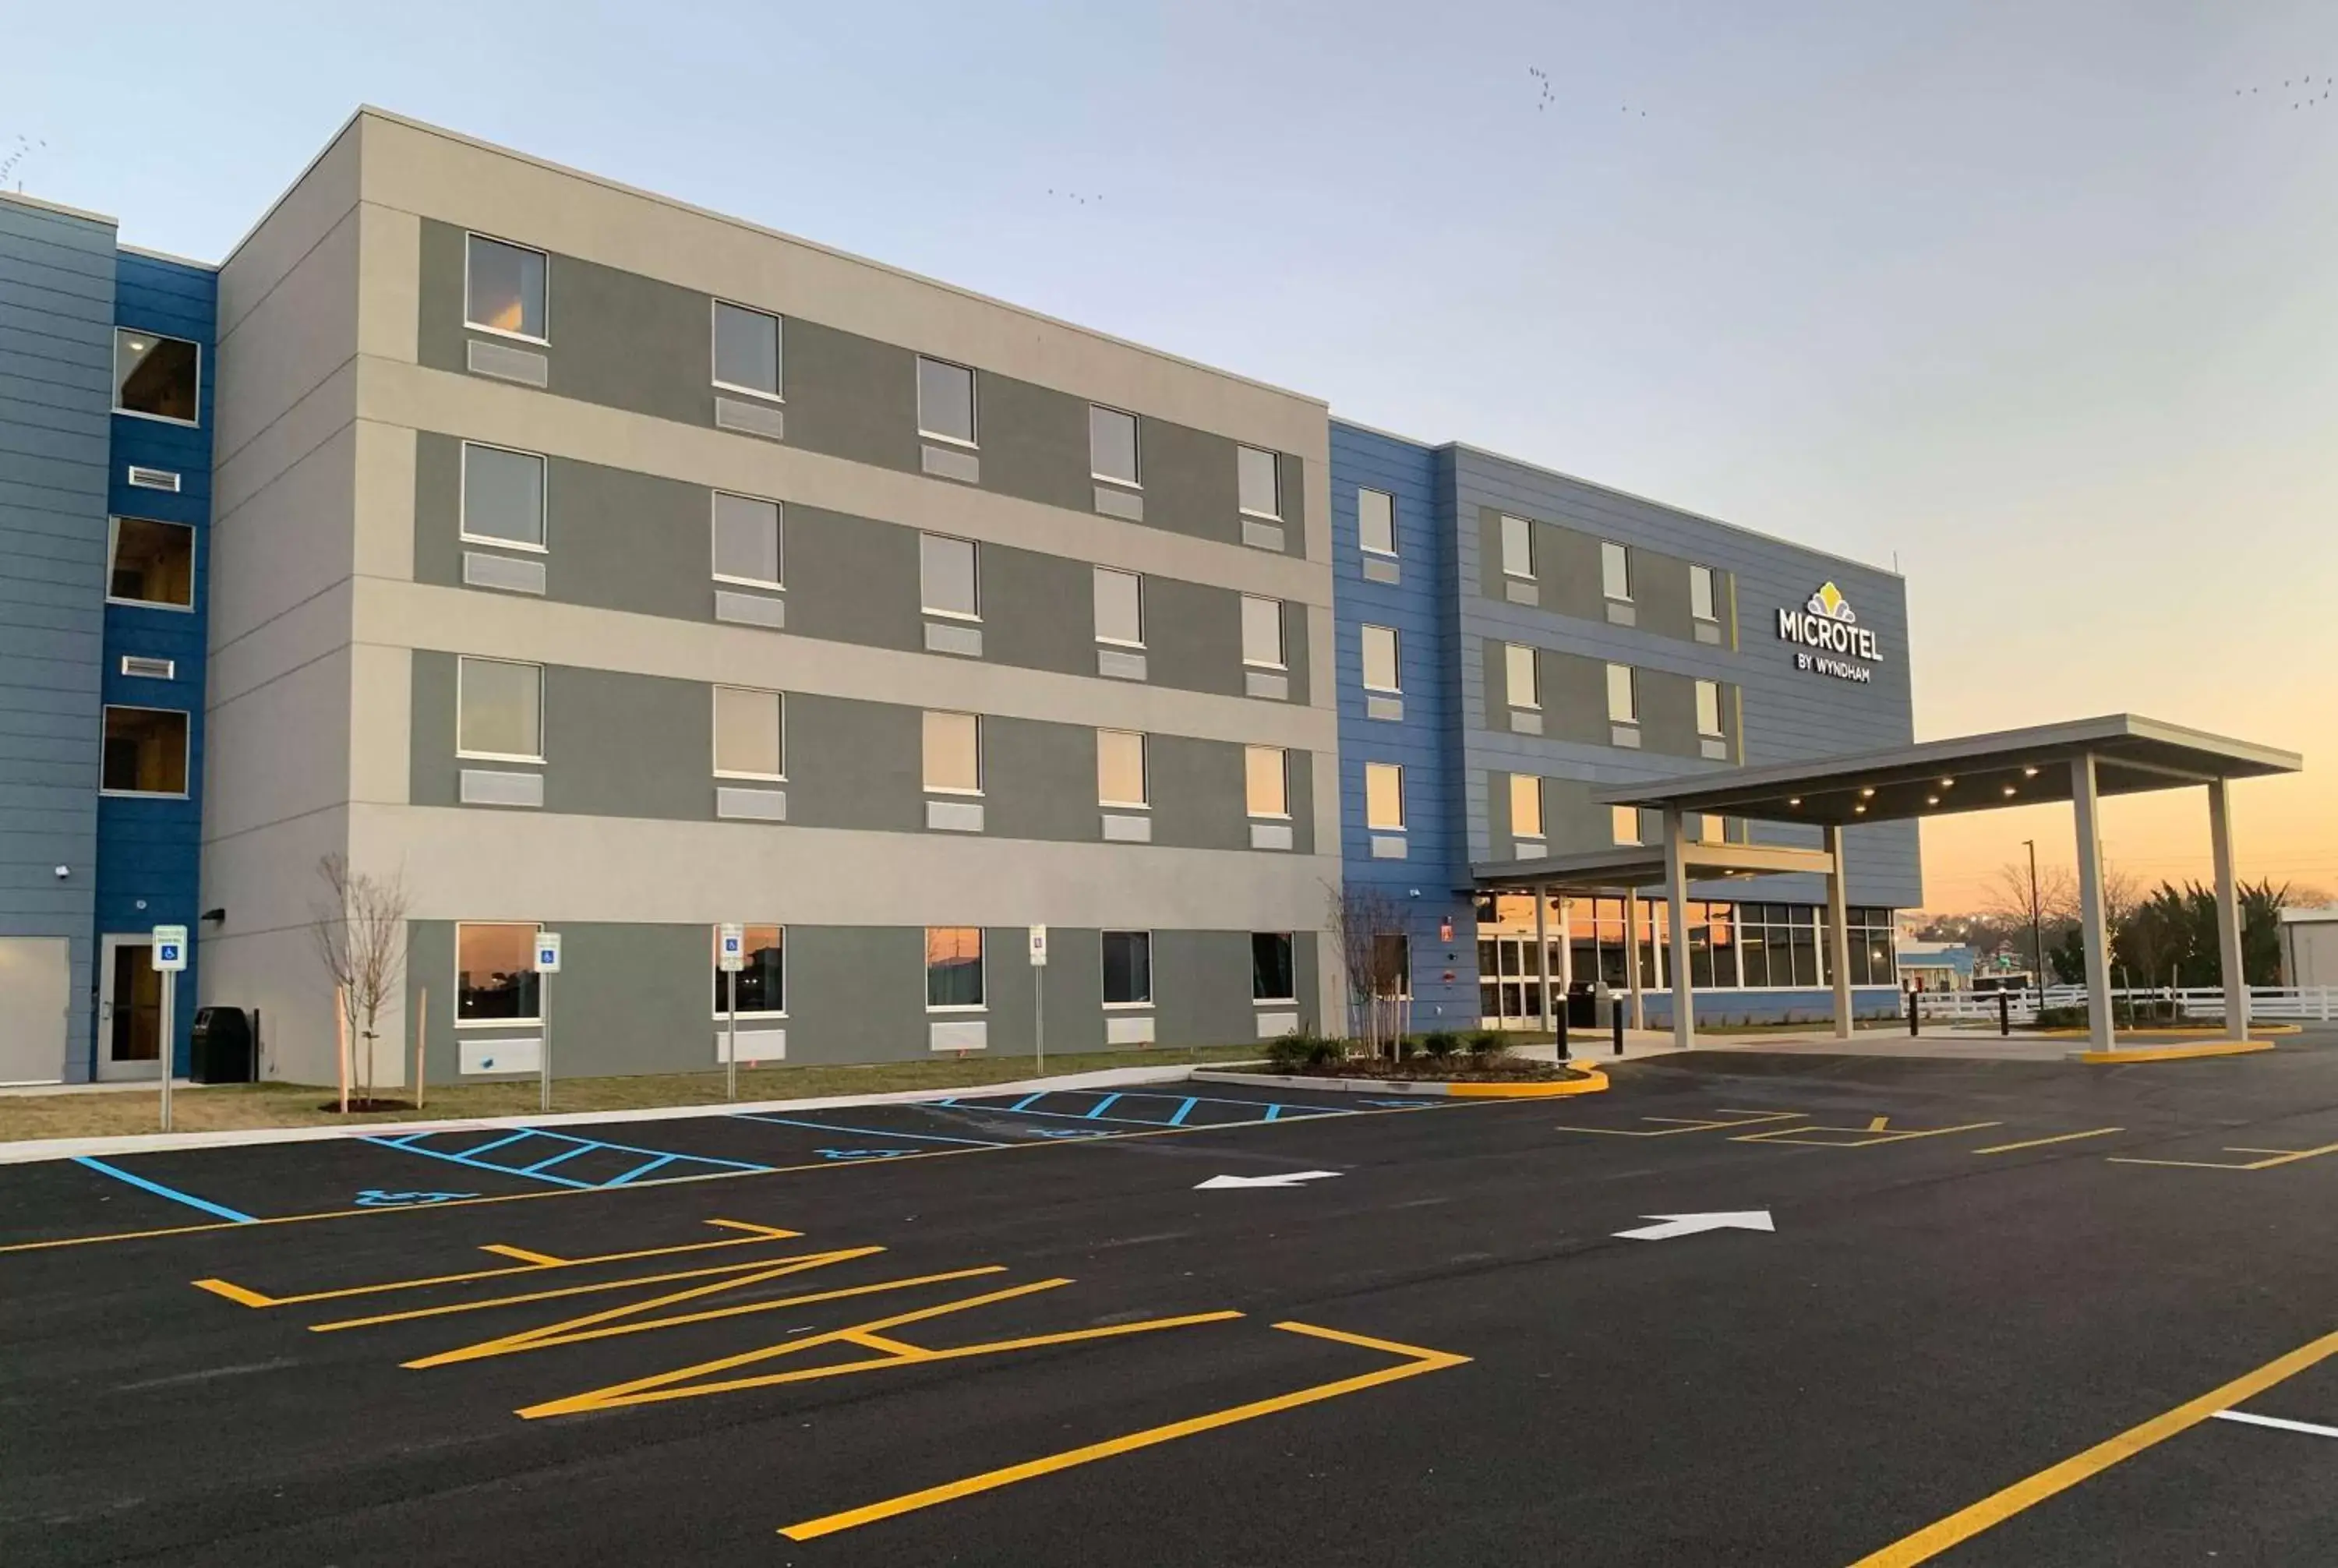 Property Building in Microtel Inn & Suites by Wyndham Rehoboth Beach